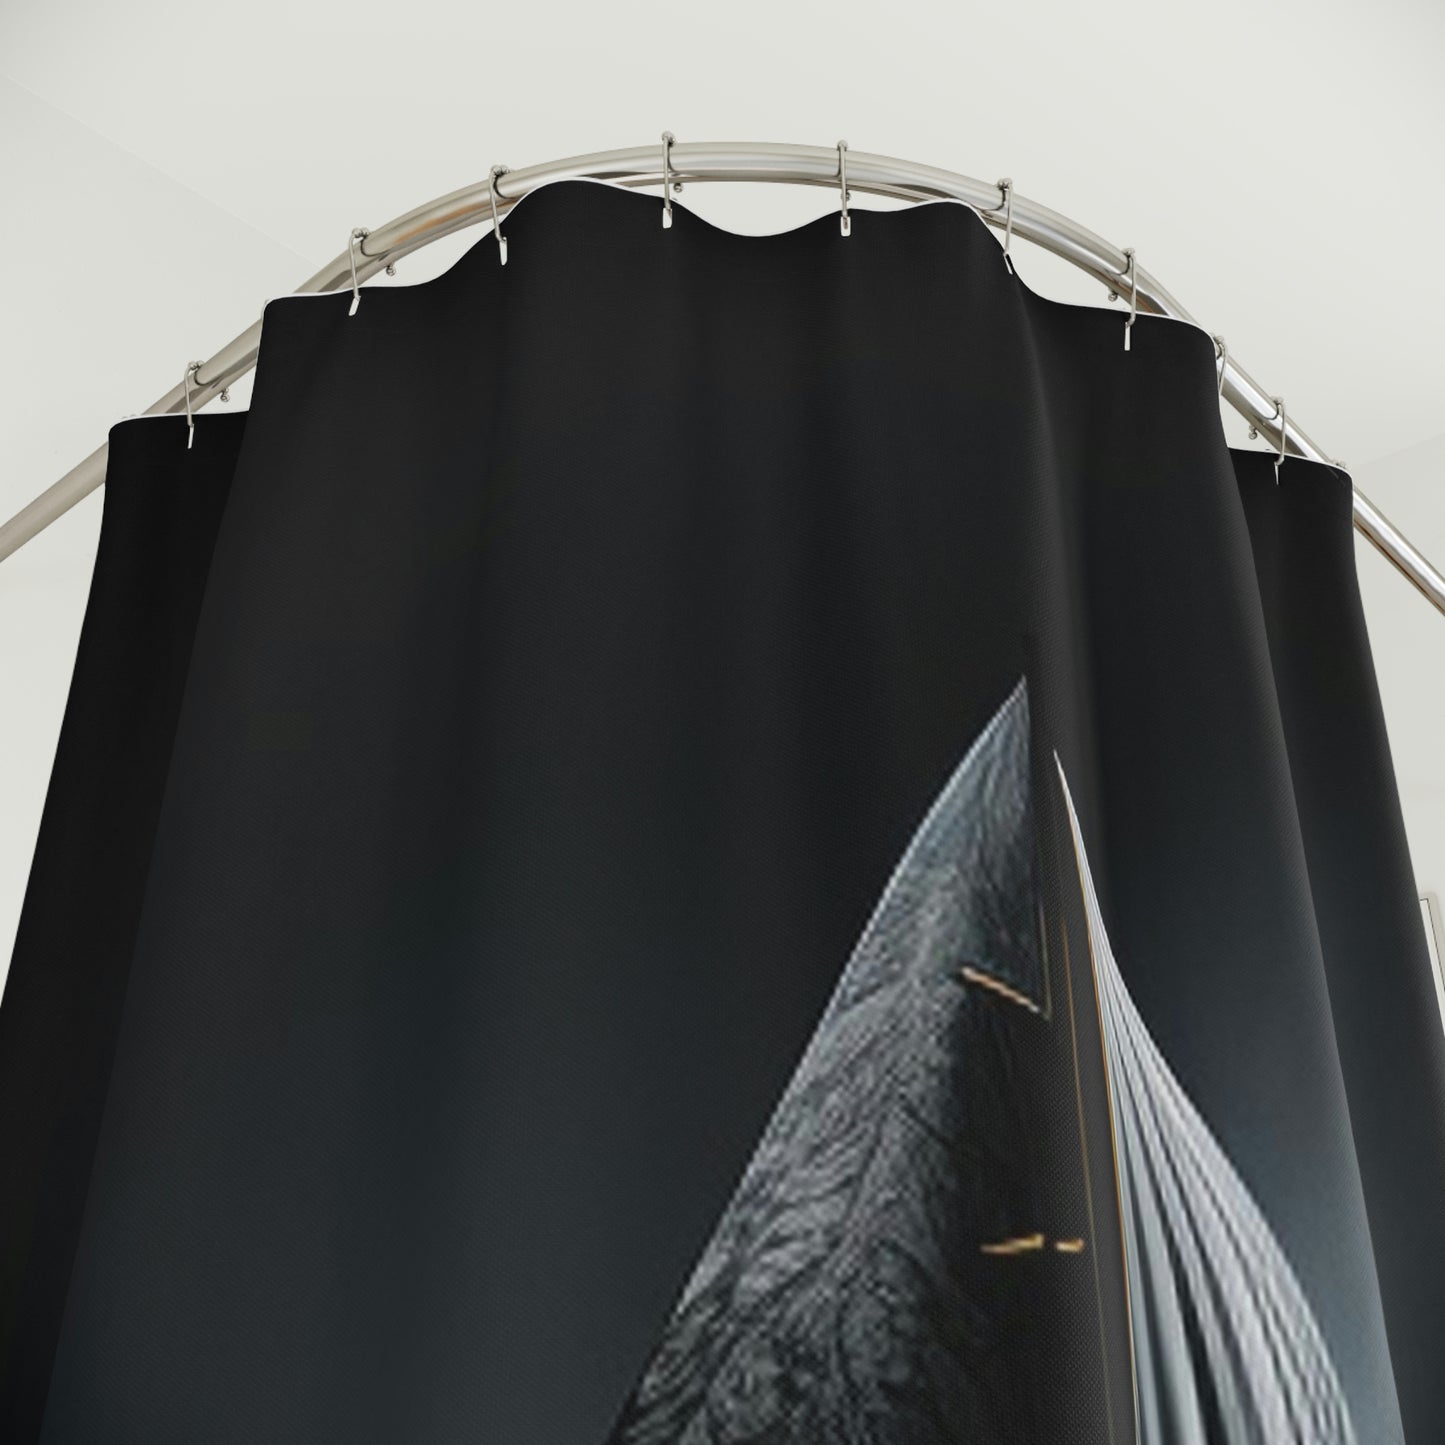 Polyester Shower Curtain glow sailboat 1